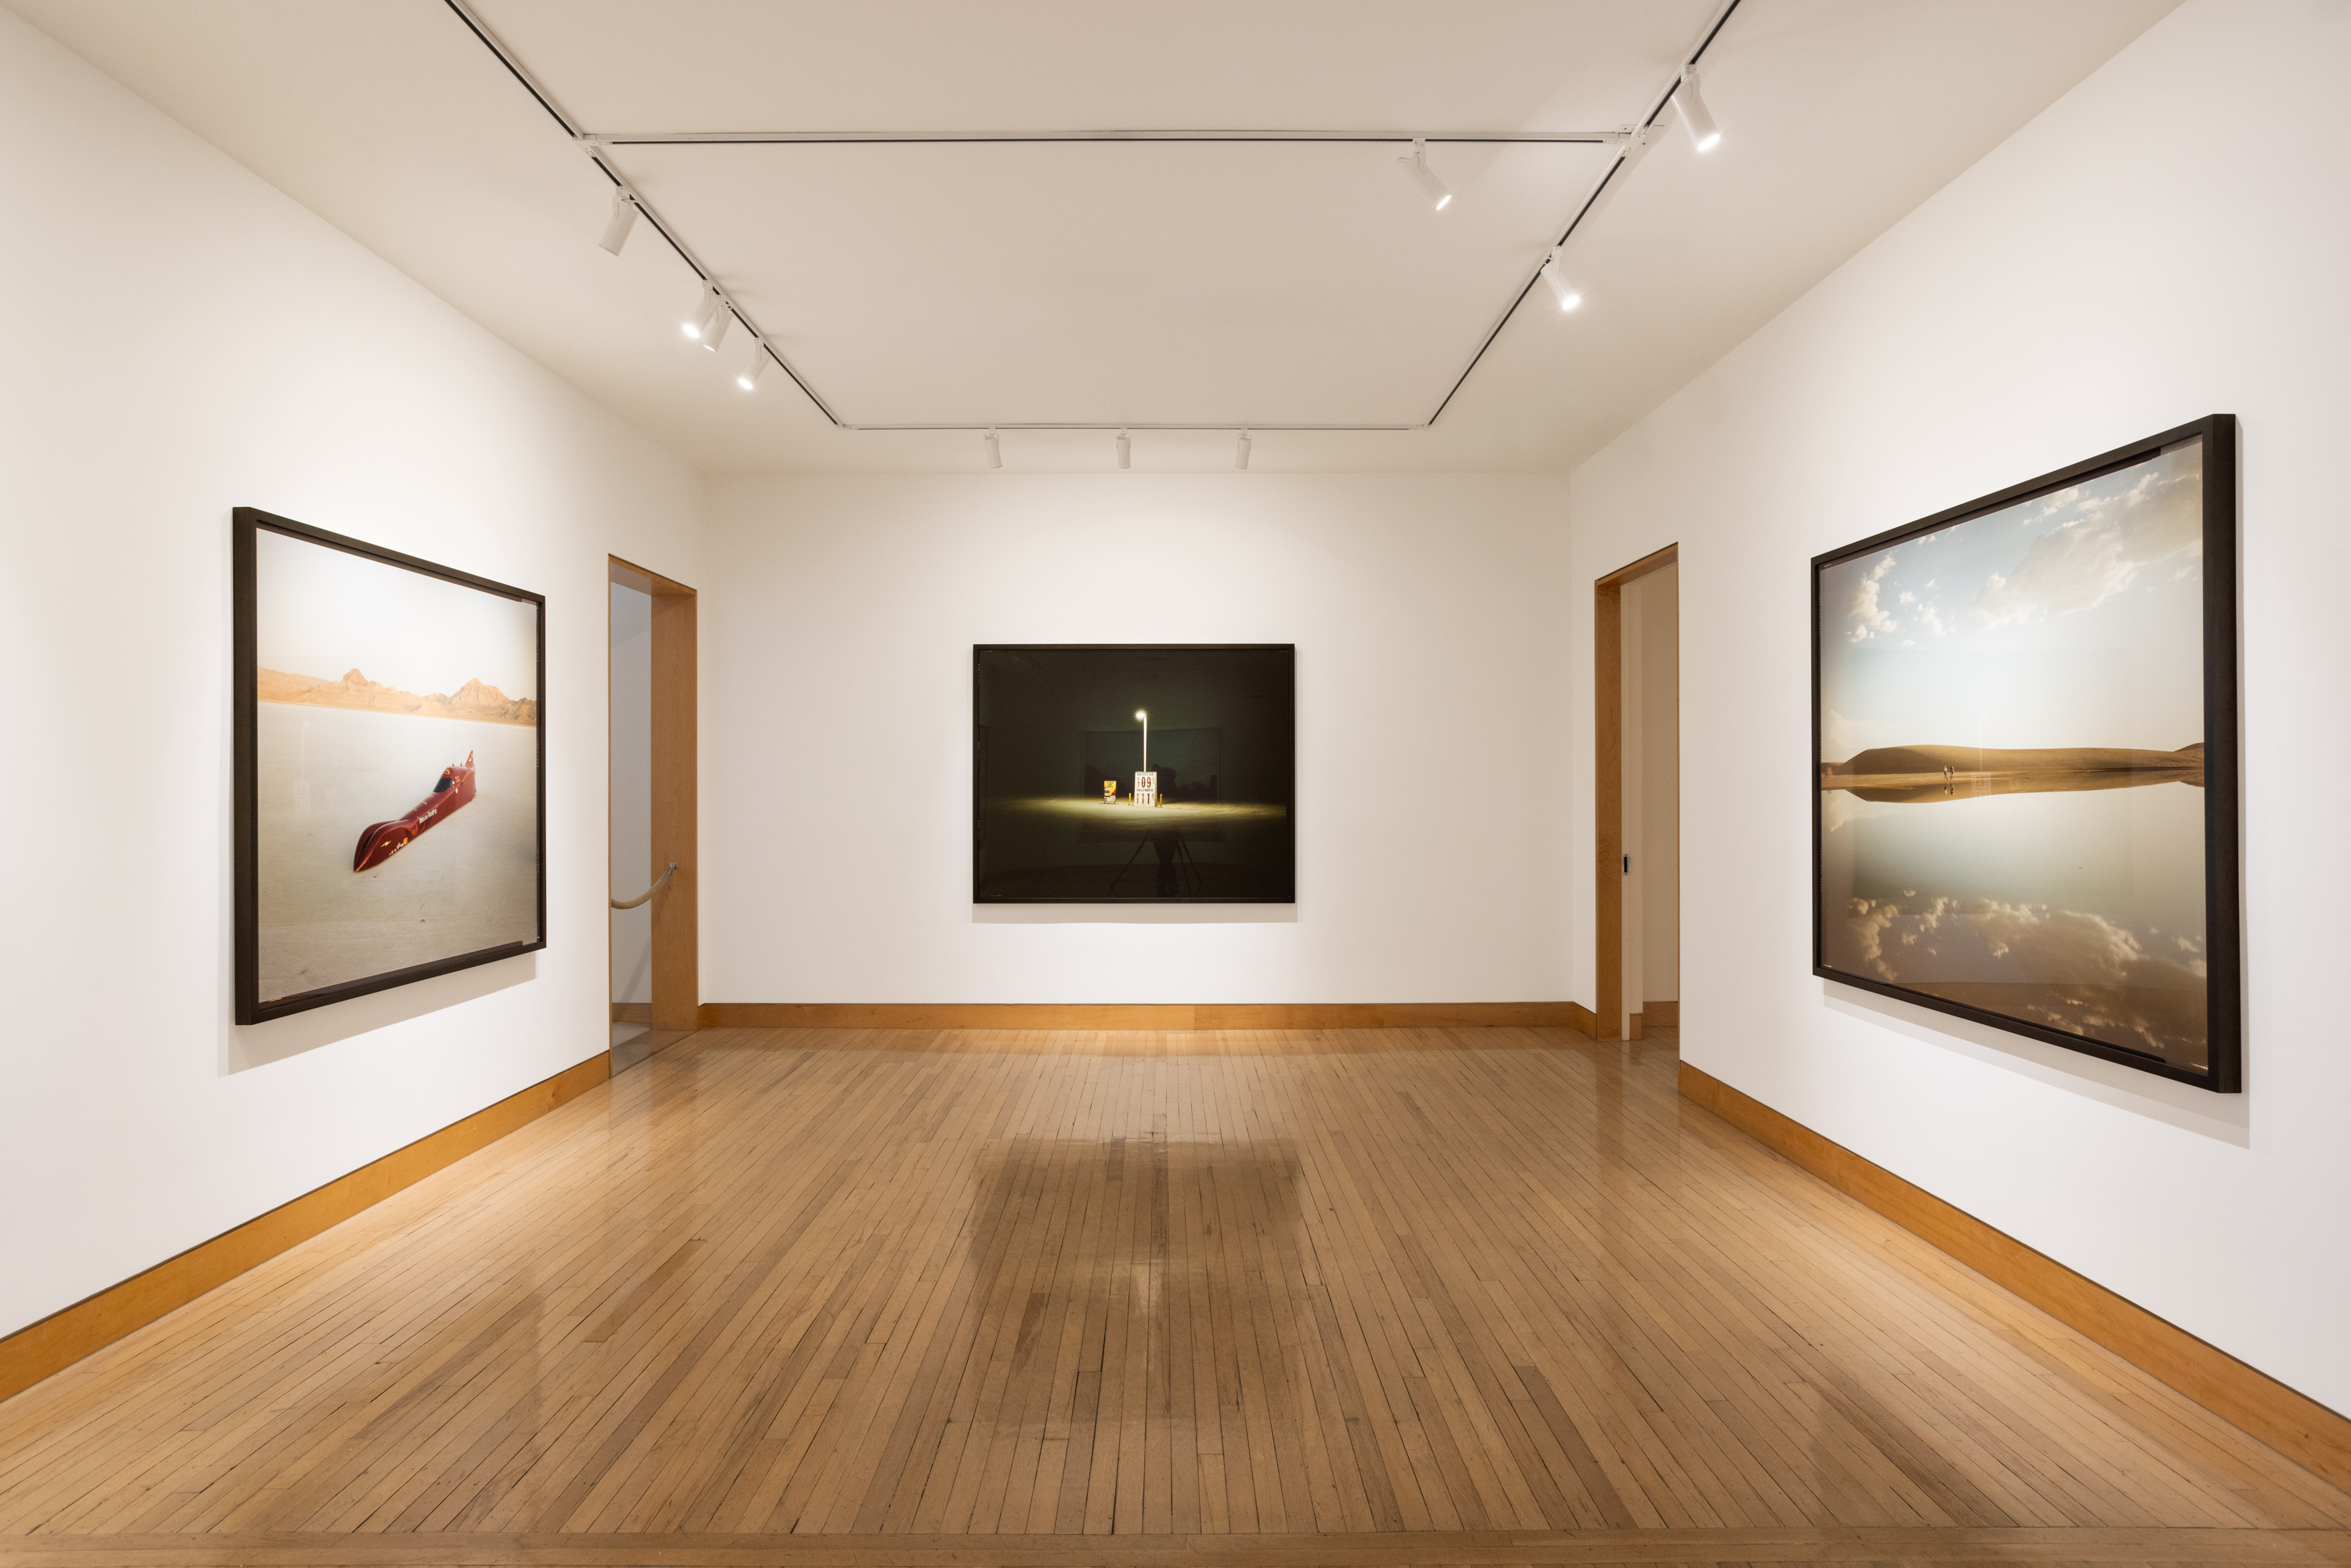 Color image of three color photographs depicting various desert scenes framed in black on white gallery walls